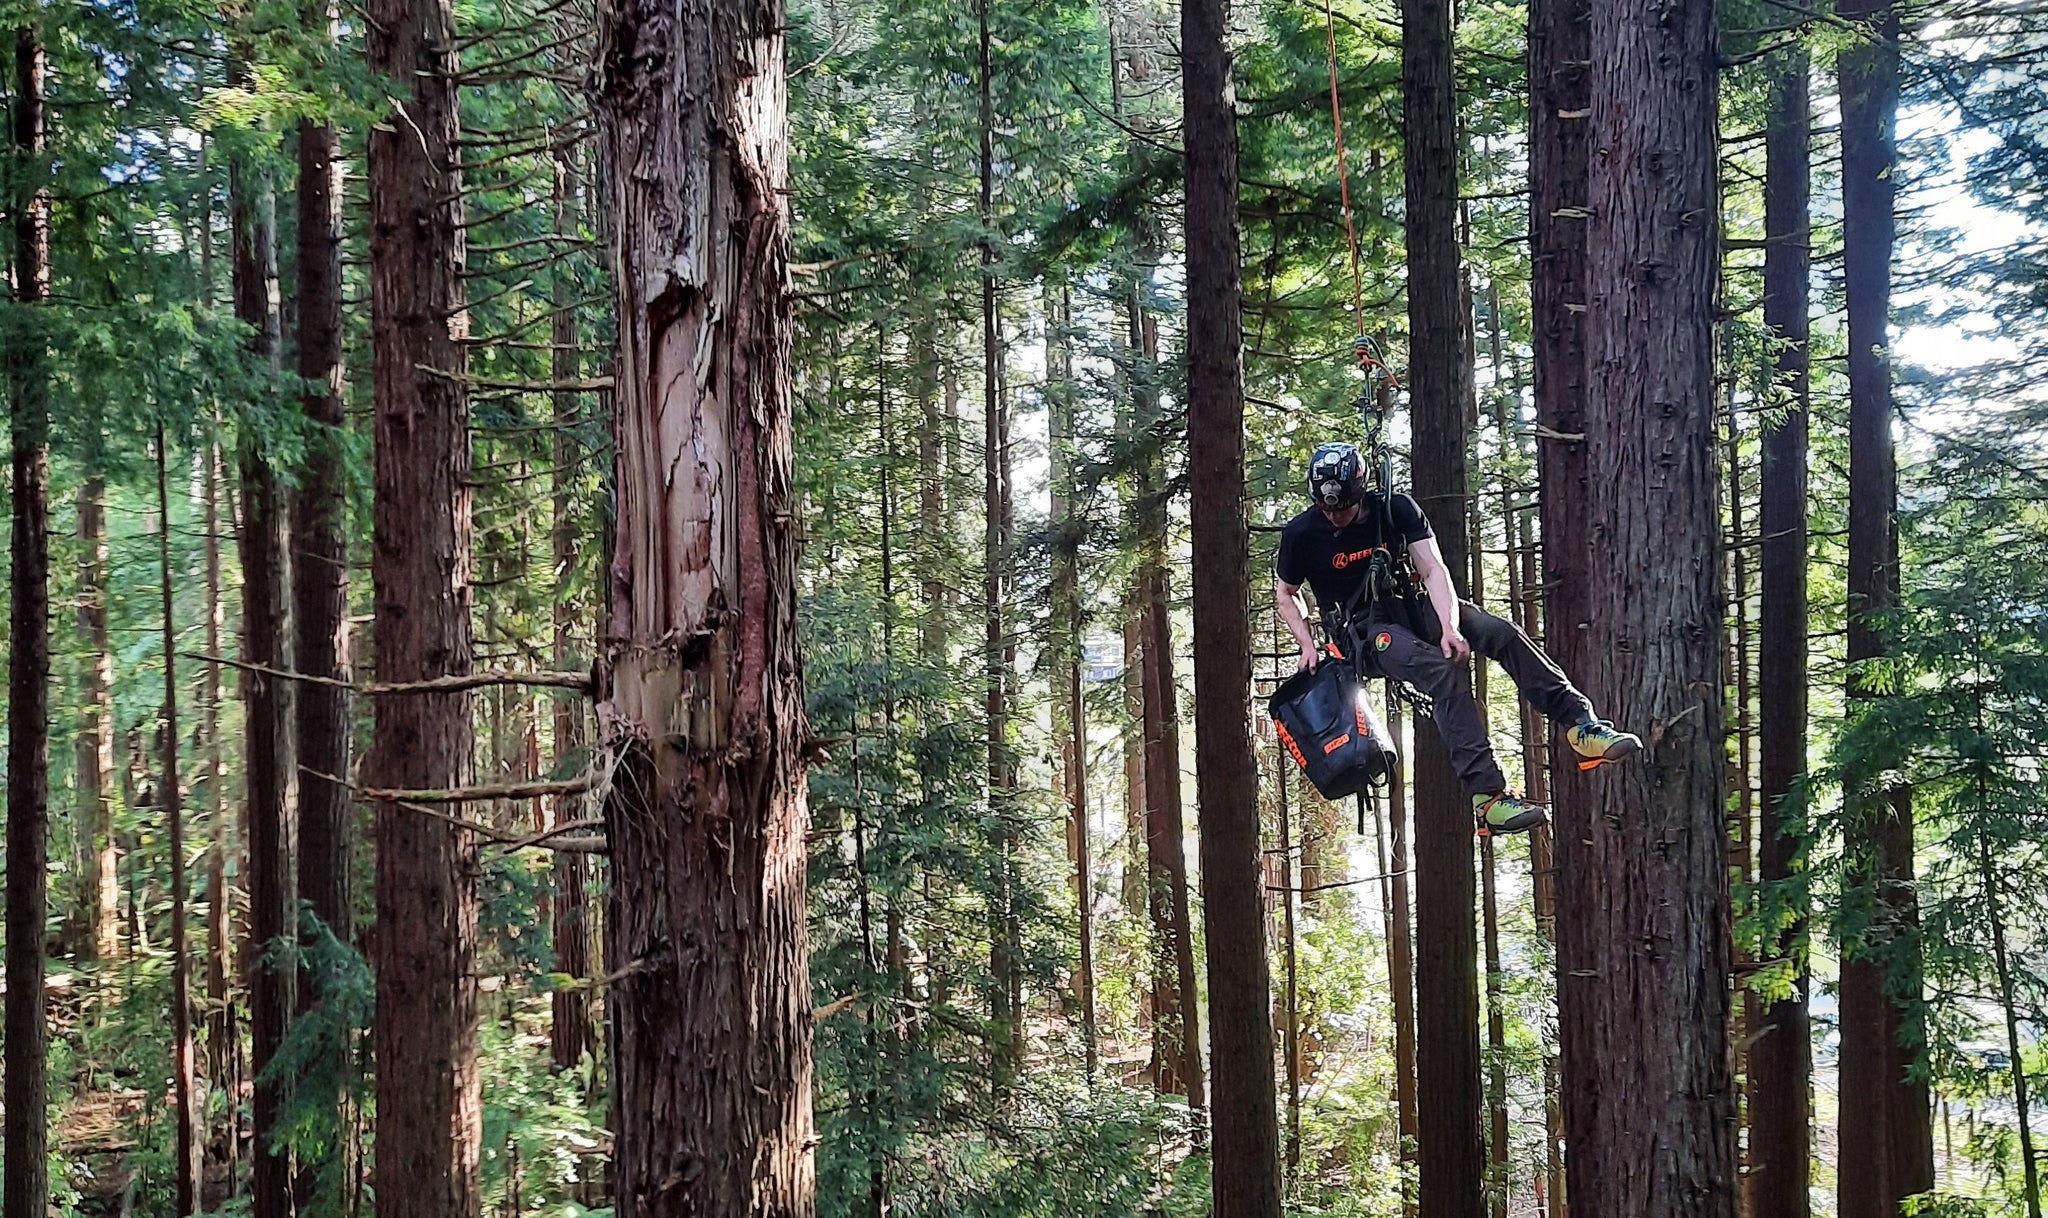 Rog in the Sequoia forest with the RB28